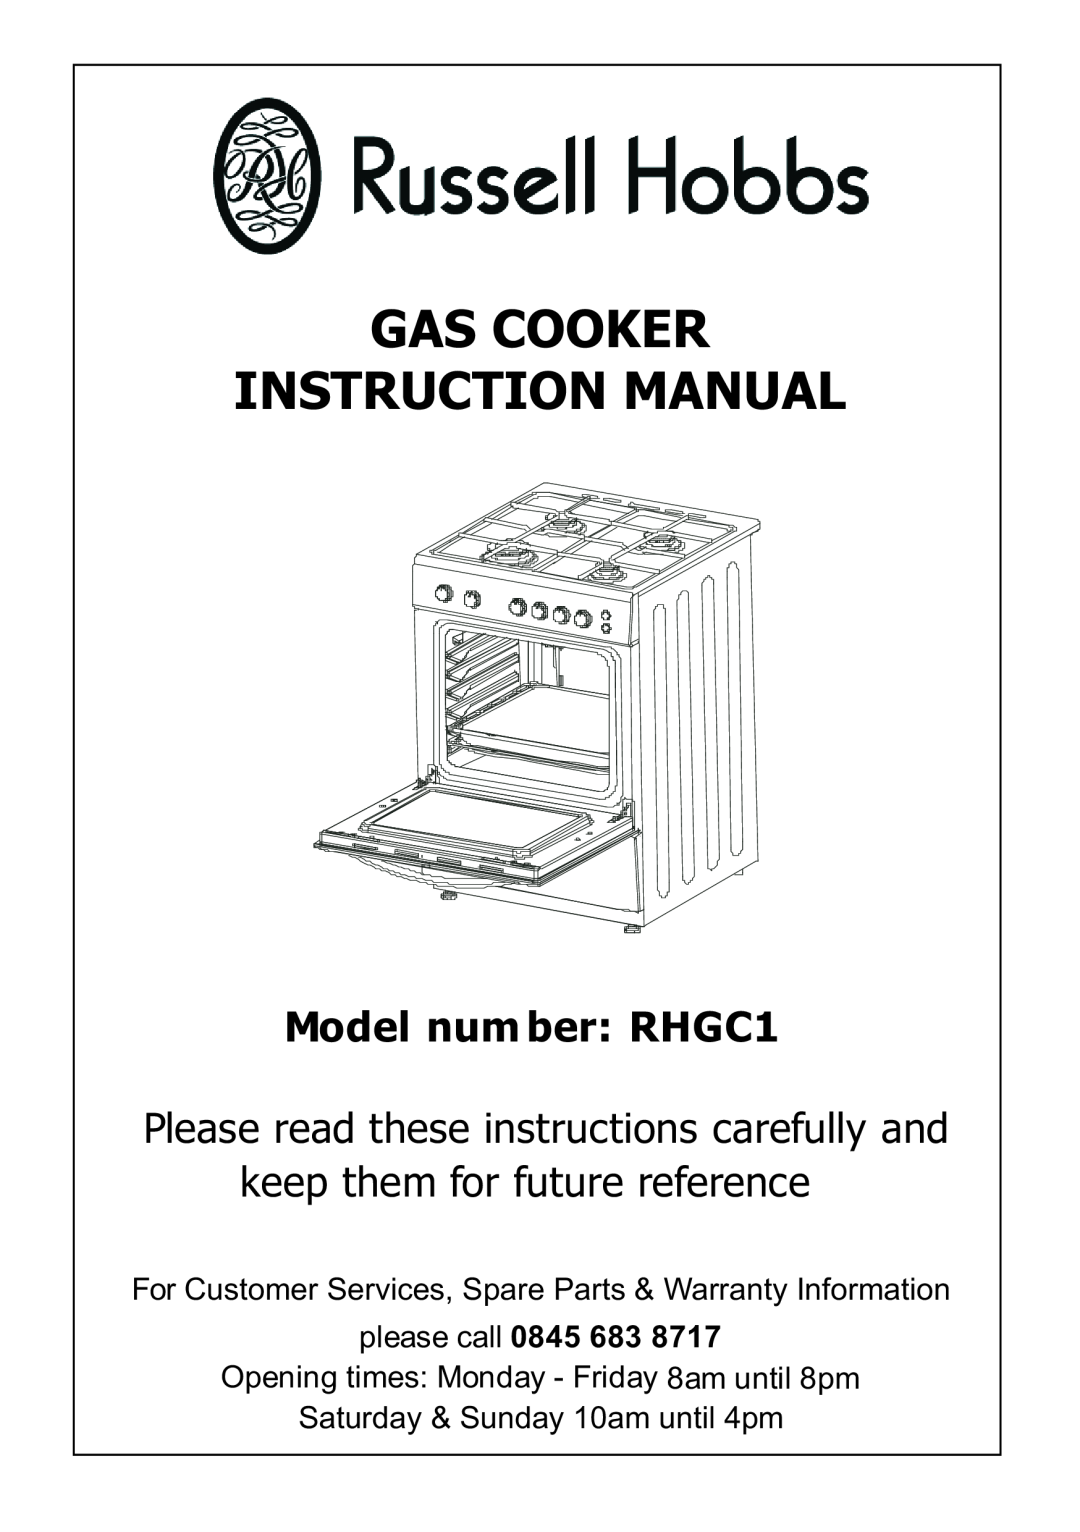 Russell Hobbs RHGC1 instruction manual Opening times Monday - Friday 8am until 8pm, Saturday & Sunday 10am until 4pm 